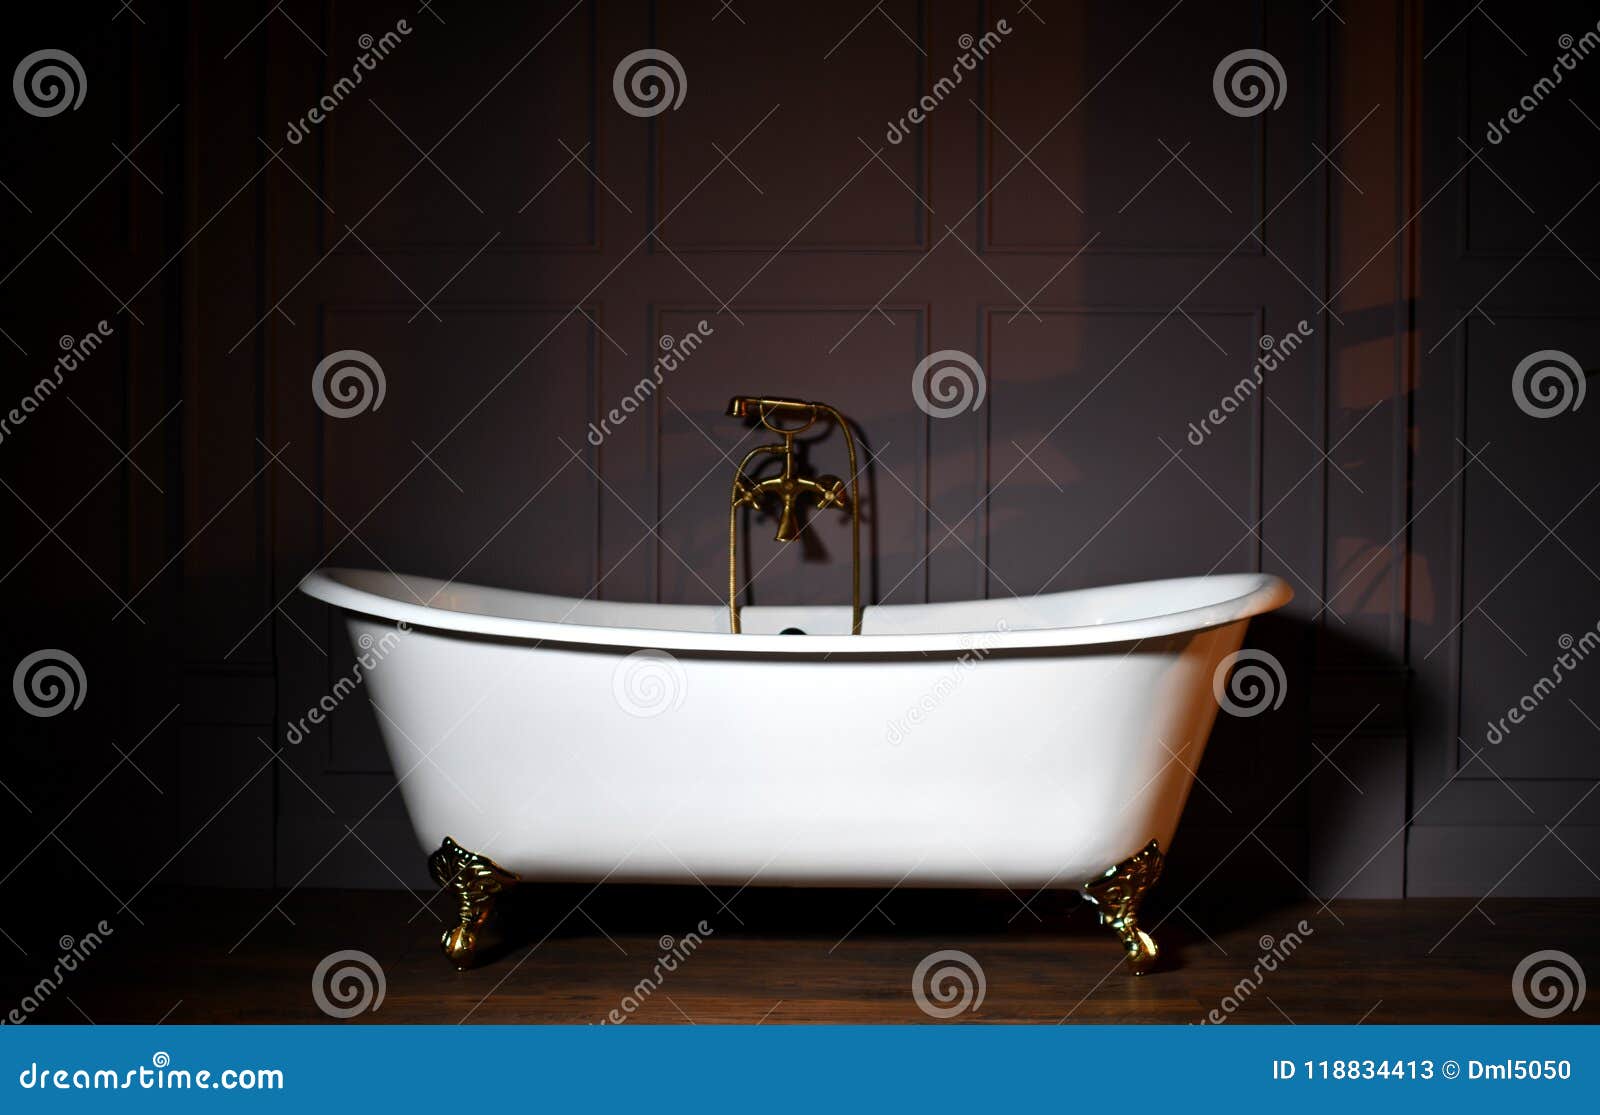 Beautiful Classic Style White Claw Foot Bathtub with Stainless Steel ...